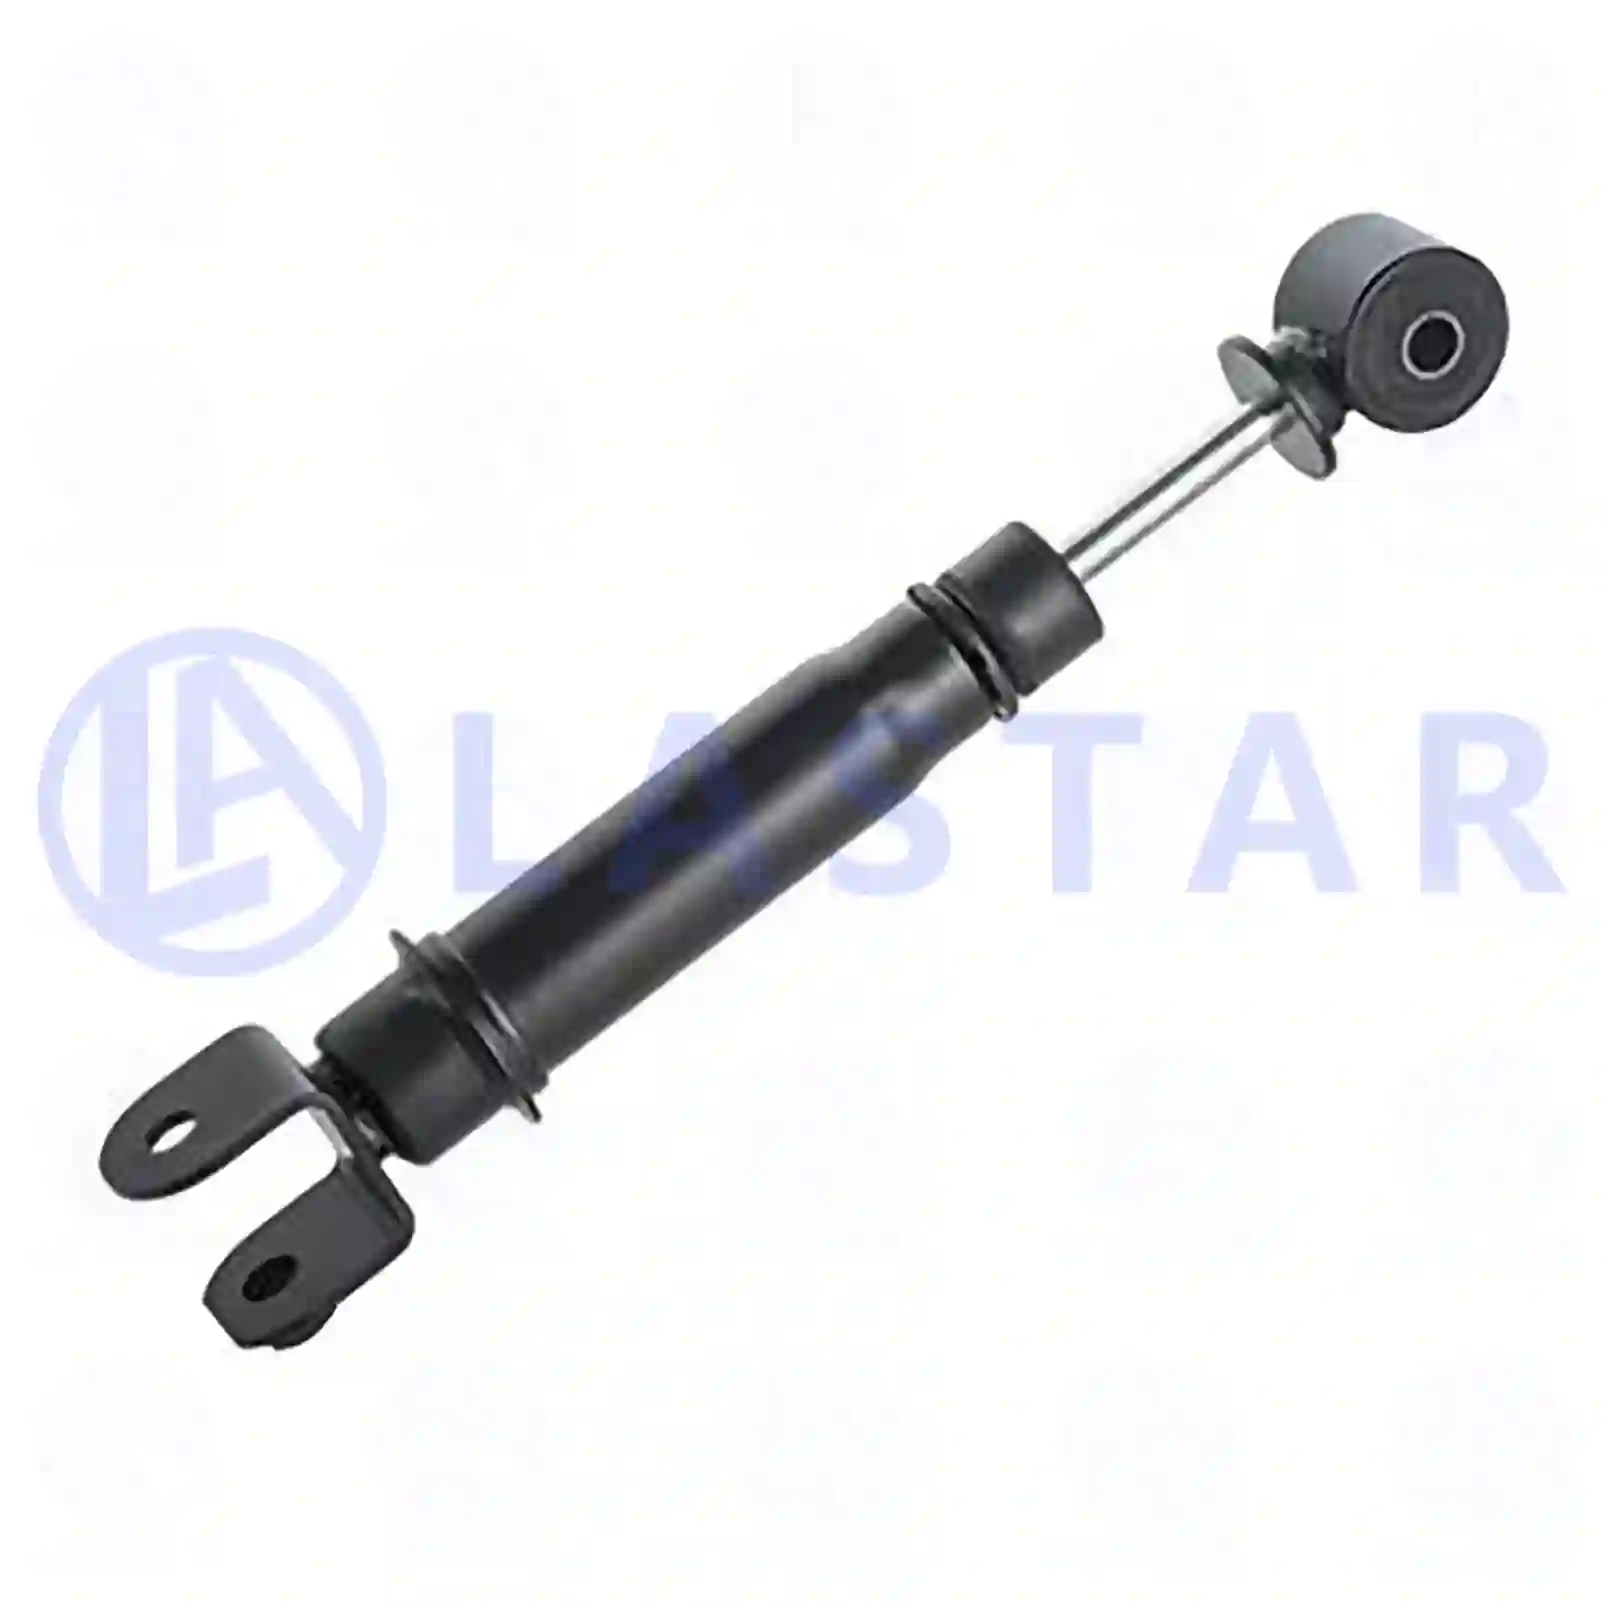 Shock absorber, cabin suspension, 77736090, 1871657 ||  77736090 Lastar Spare Part | Truck Spare Parts, Auotomotive Spare Parts Shock absorber, cabin suspension, 77736090, 1871657 ||  77736090 Lastar Spare Part | Truck Spare Parts, Auotomotive Spare Parts